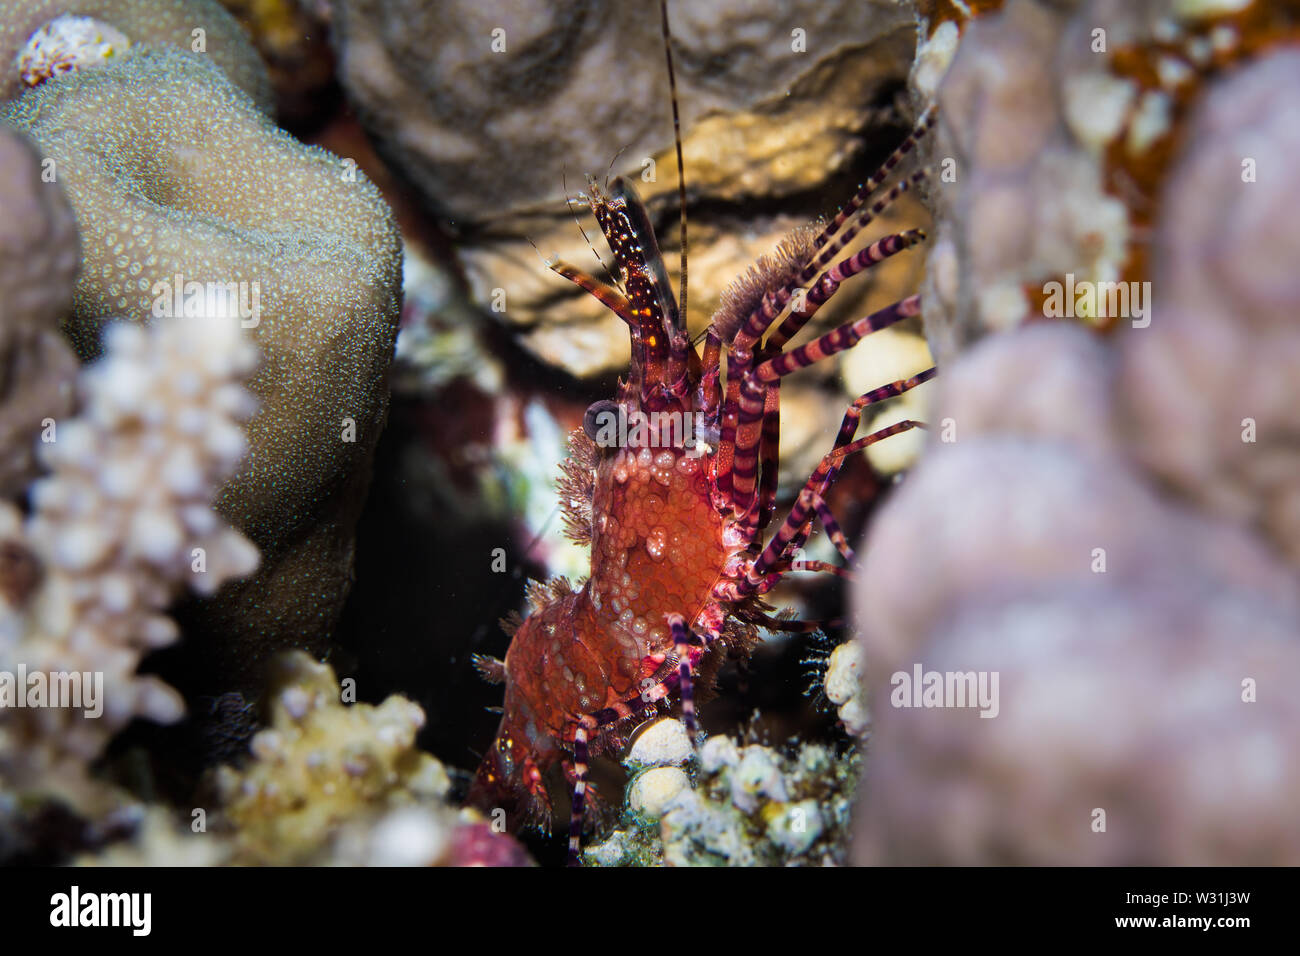 Marbled shrimp (Saron marmoratus) sitting in a crevice close up. Looks like marble purple and orange body with striped legs. Stock Photo